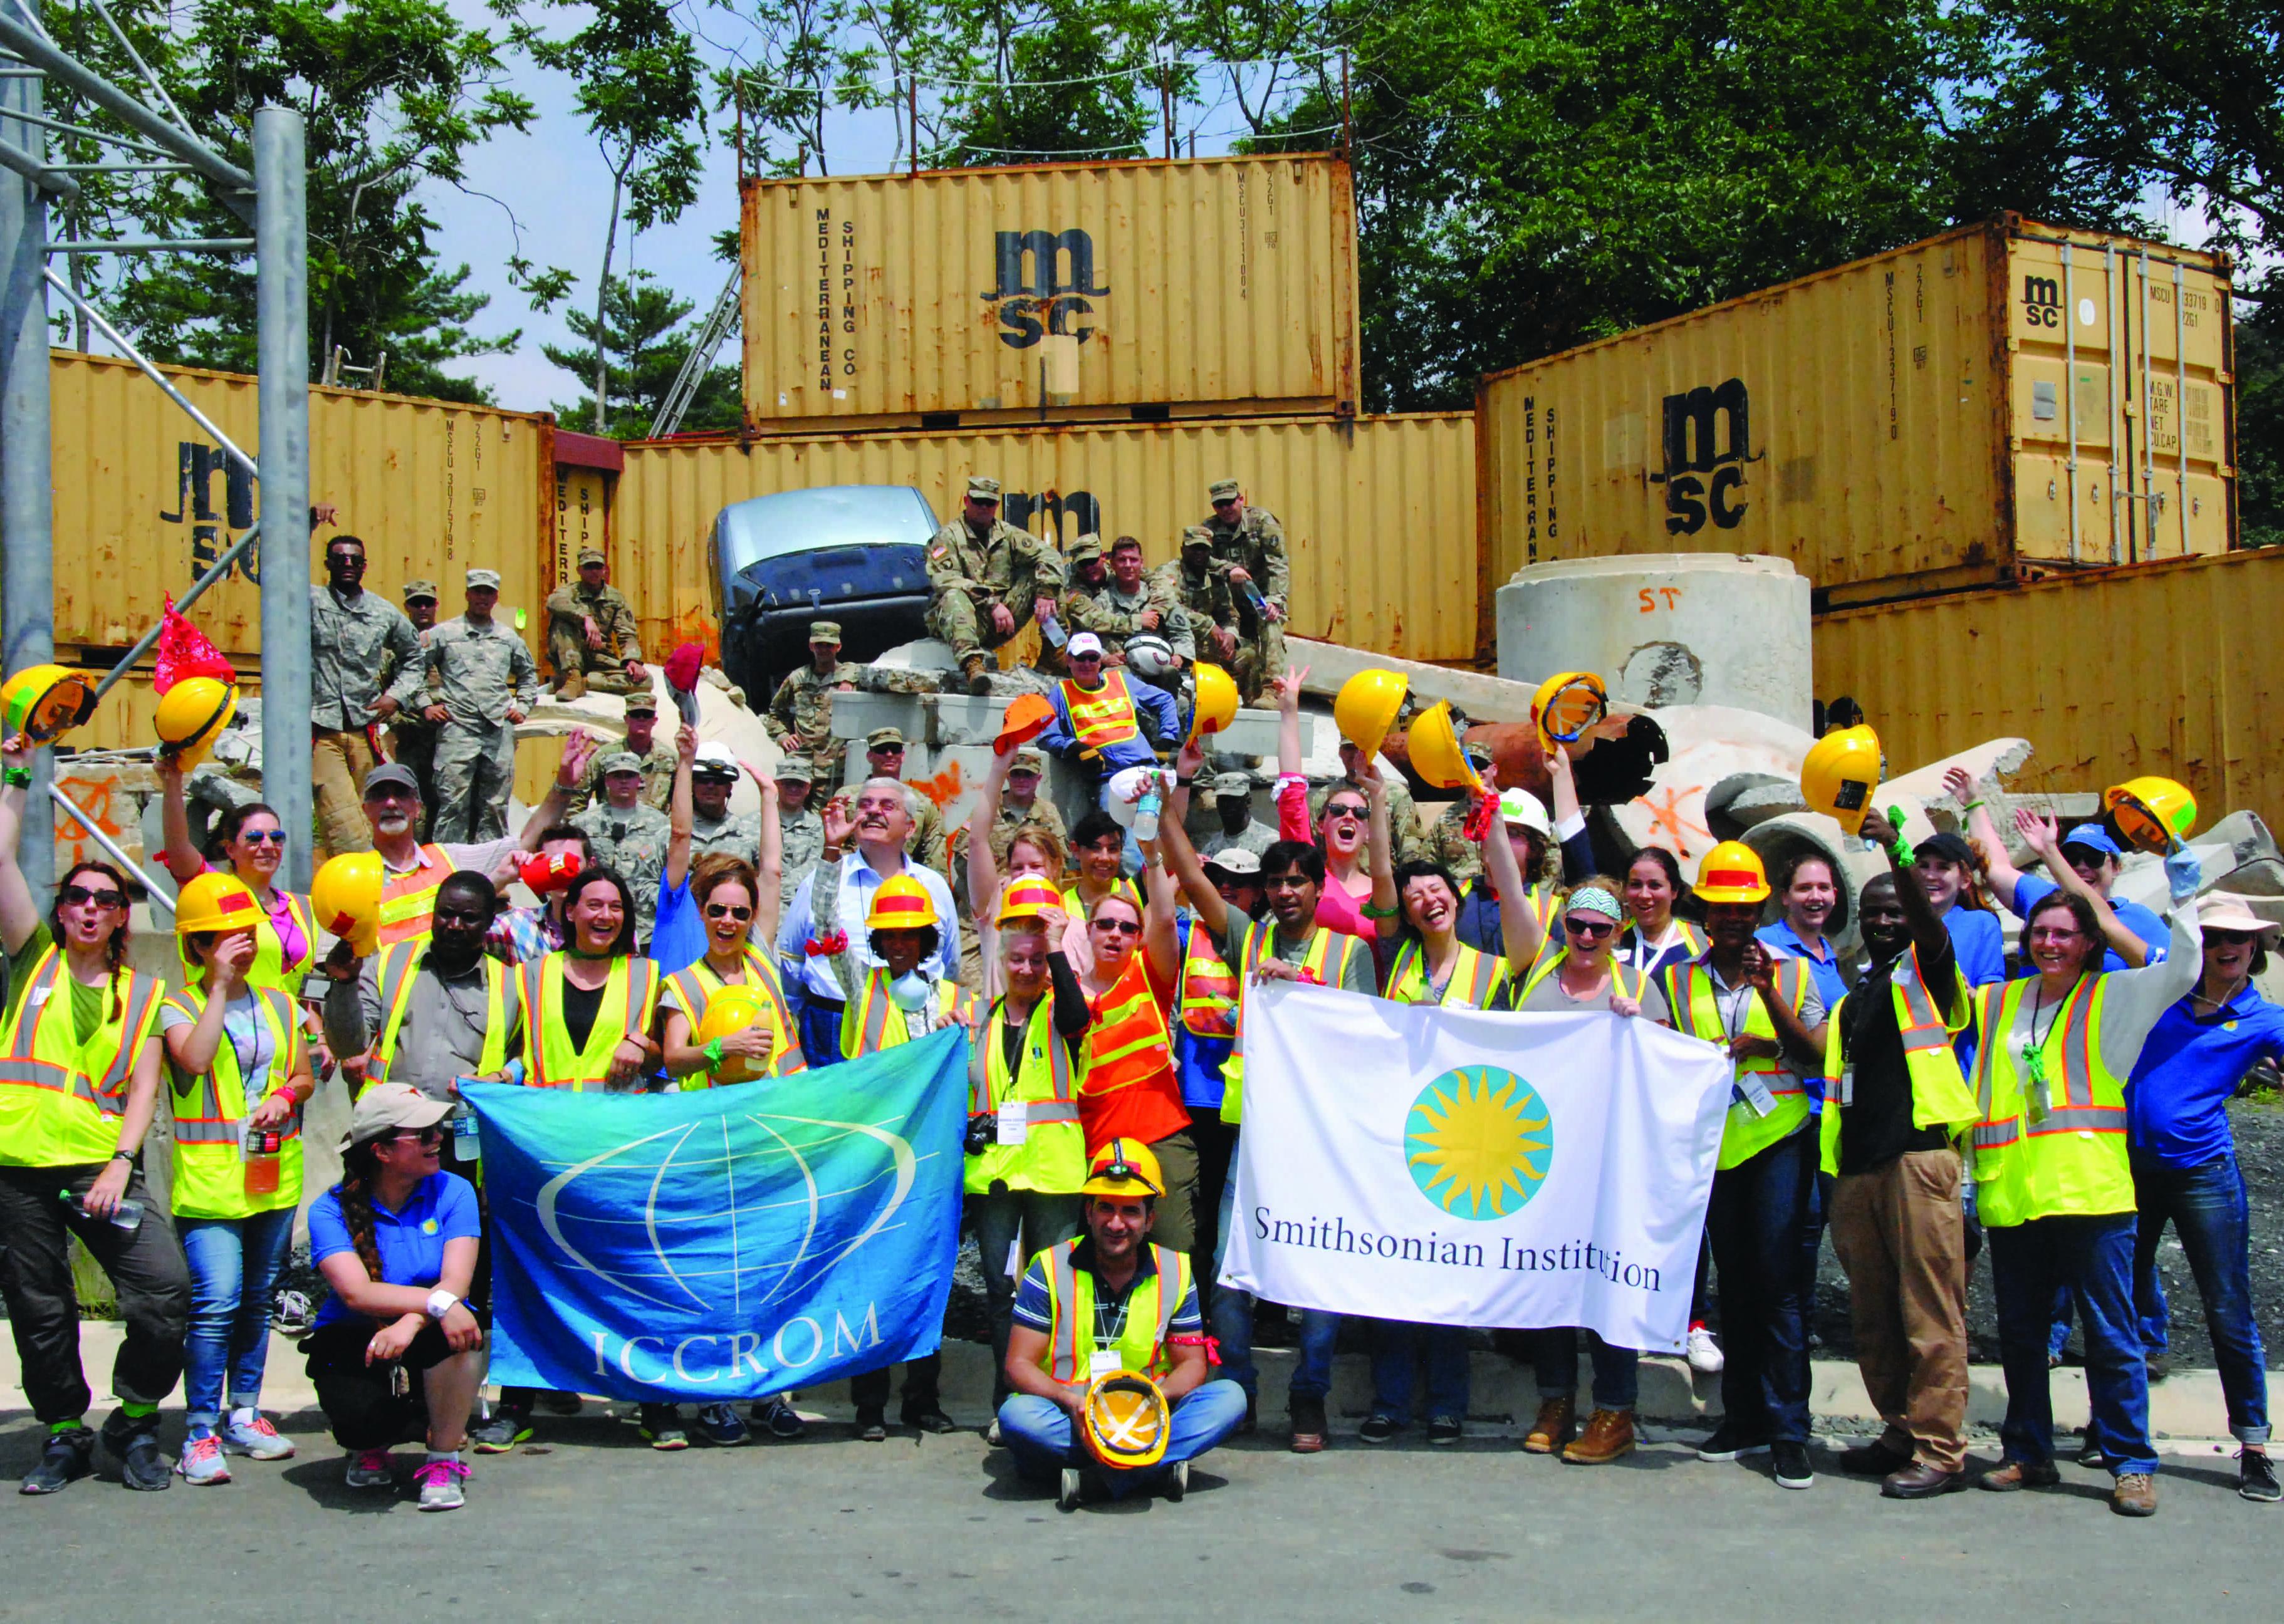 A group of people in yellow vests and hard hats stand in front of shipping containers while holding a blue ICOM flag and white Smithsonian flag